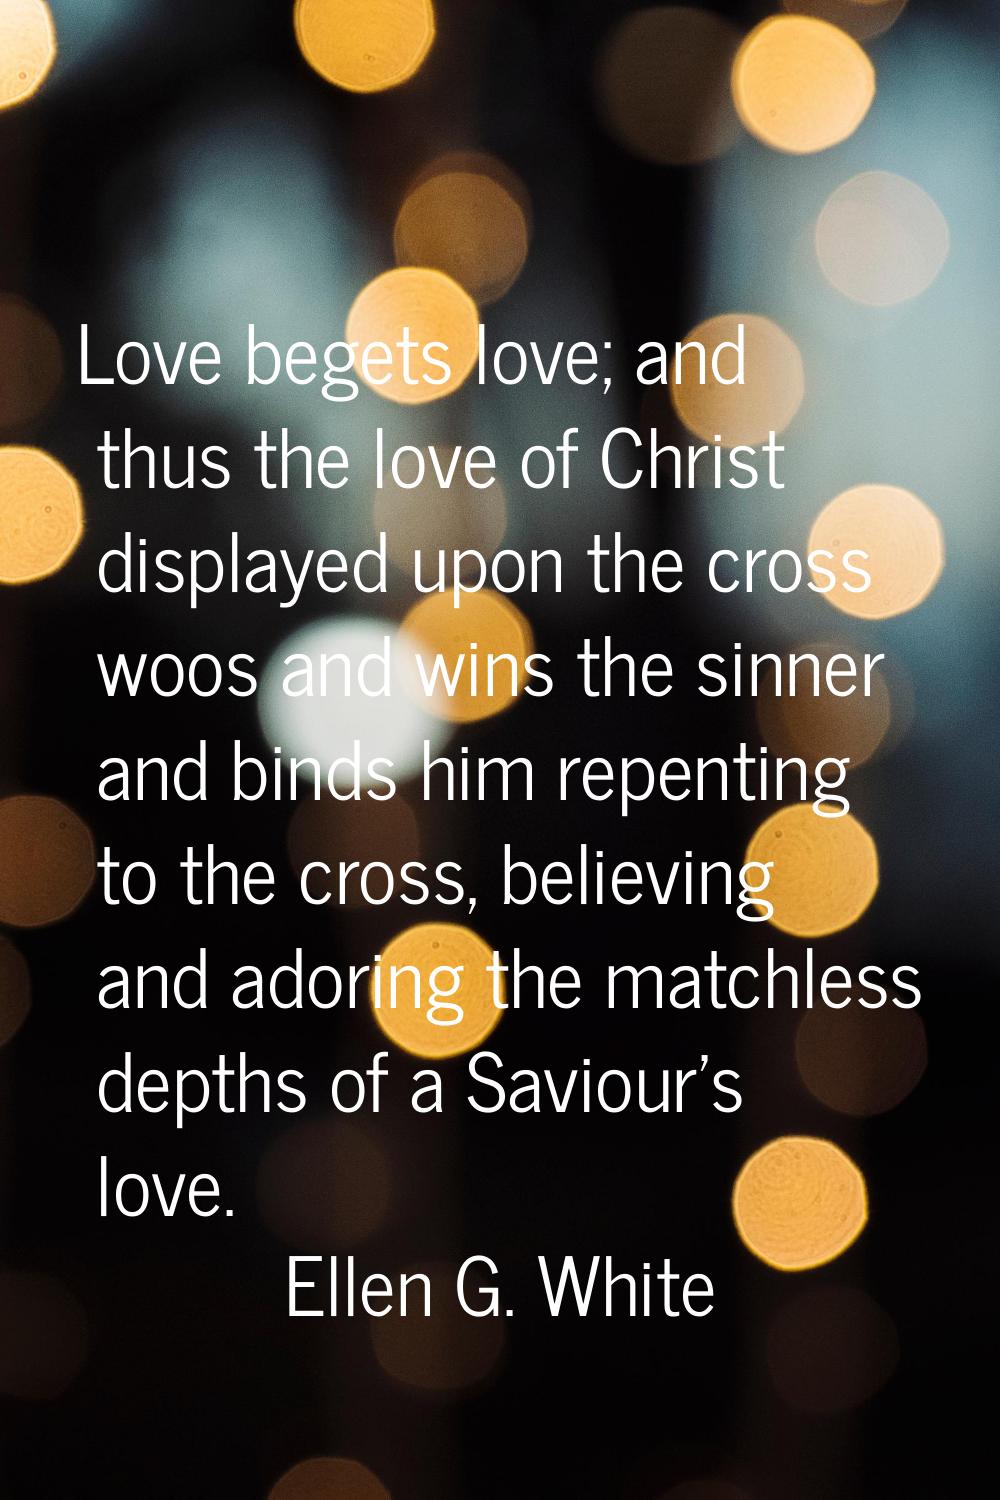 Love begets love; and thus the love of Christ displayed upon the cross woos and wins the sinner and